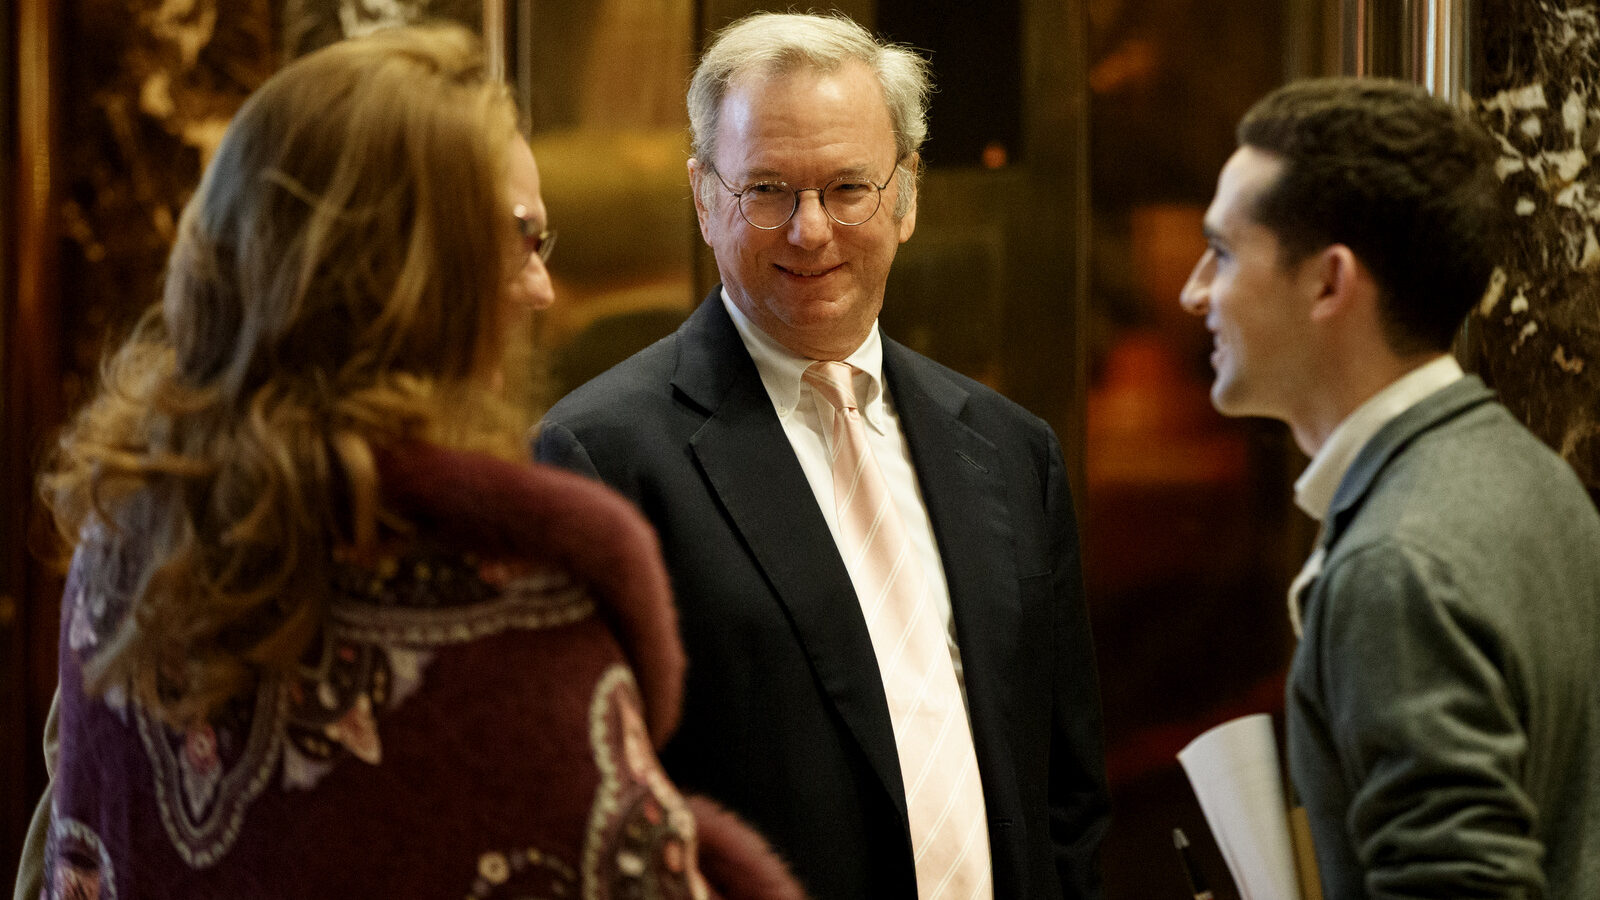 Eric Schmidt, executive chairman of Alphabet, Inc., stands in the lobby of Trump Tower in New York, Jan. 12, 2017. (AP/Evan Vucci)